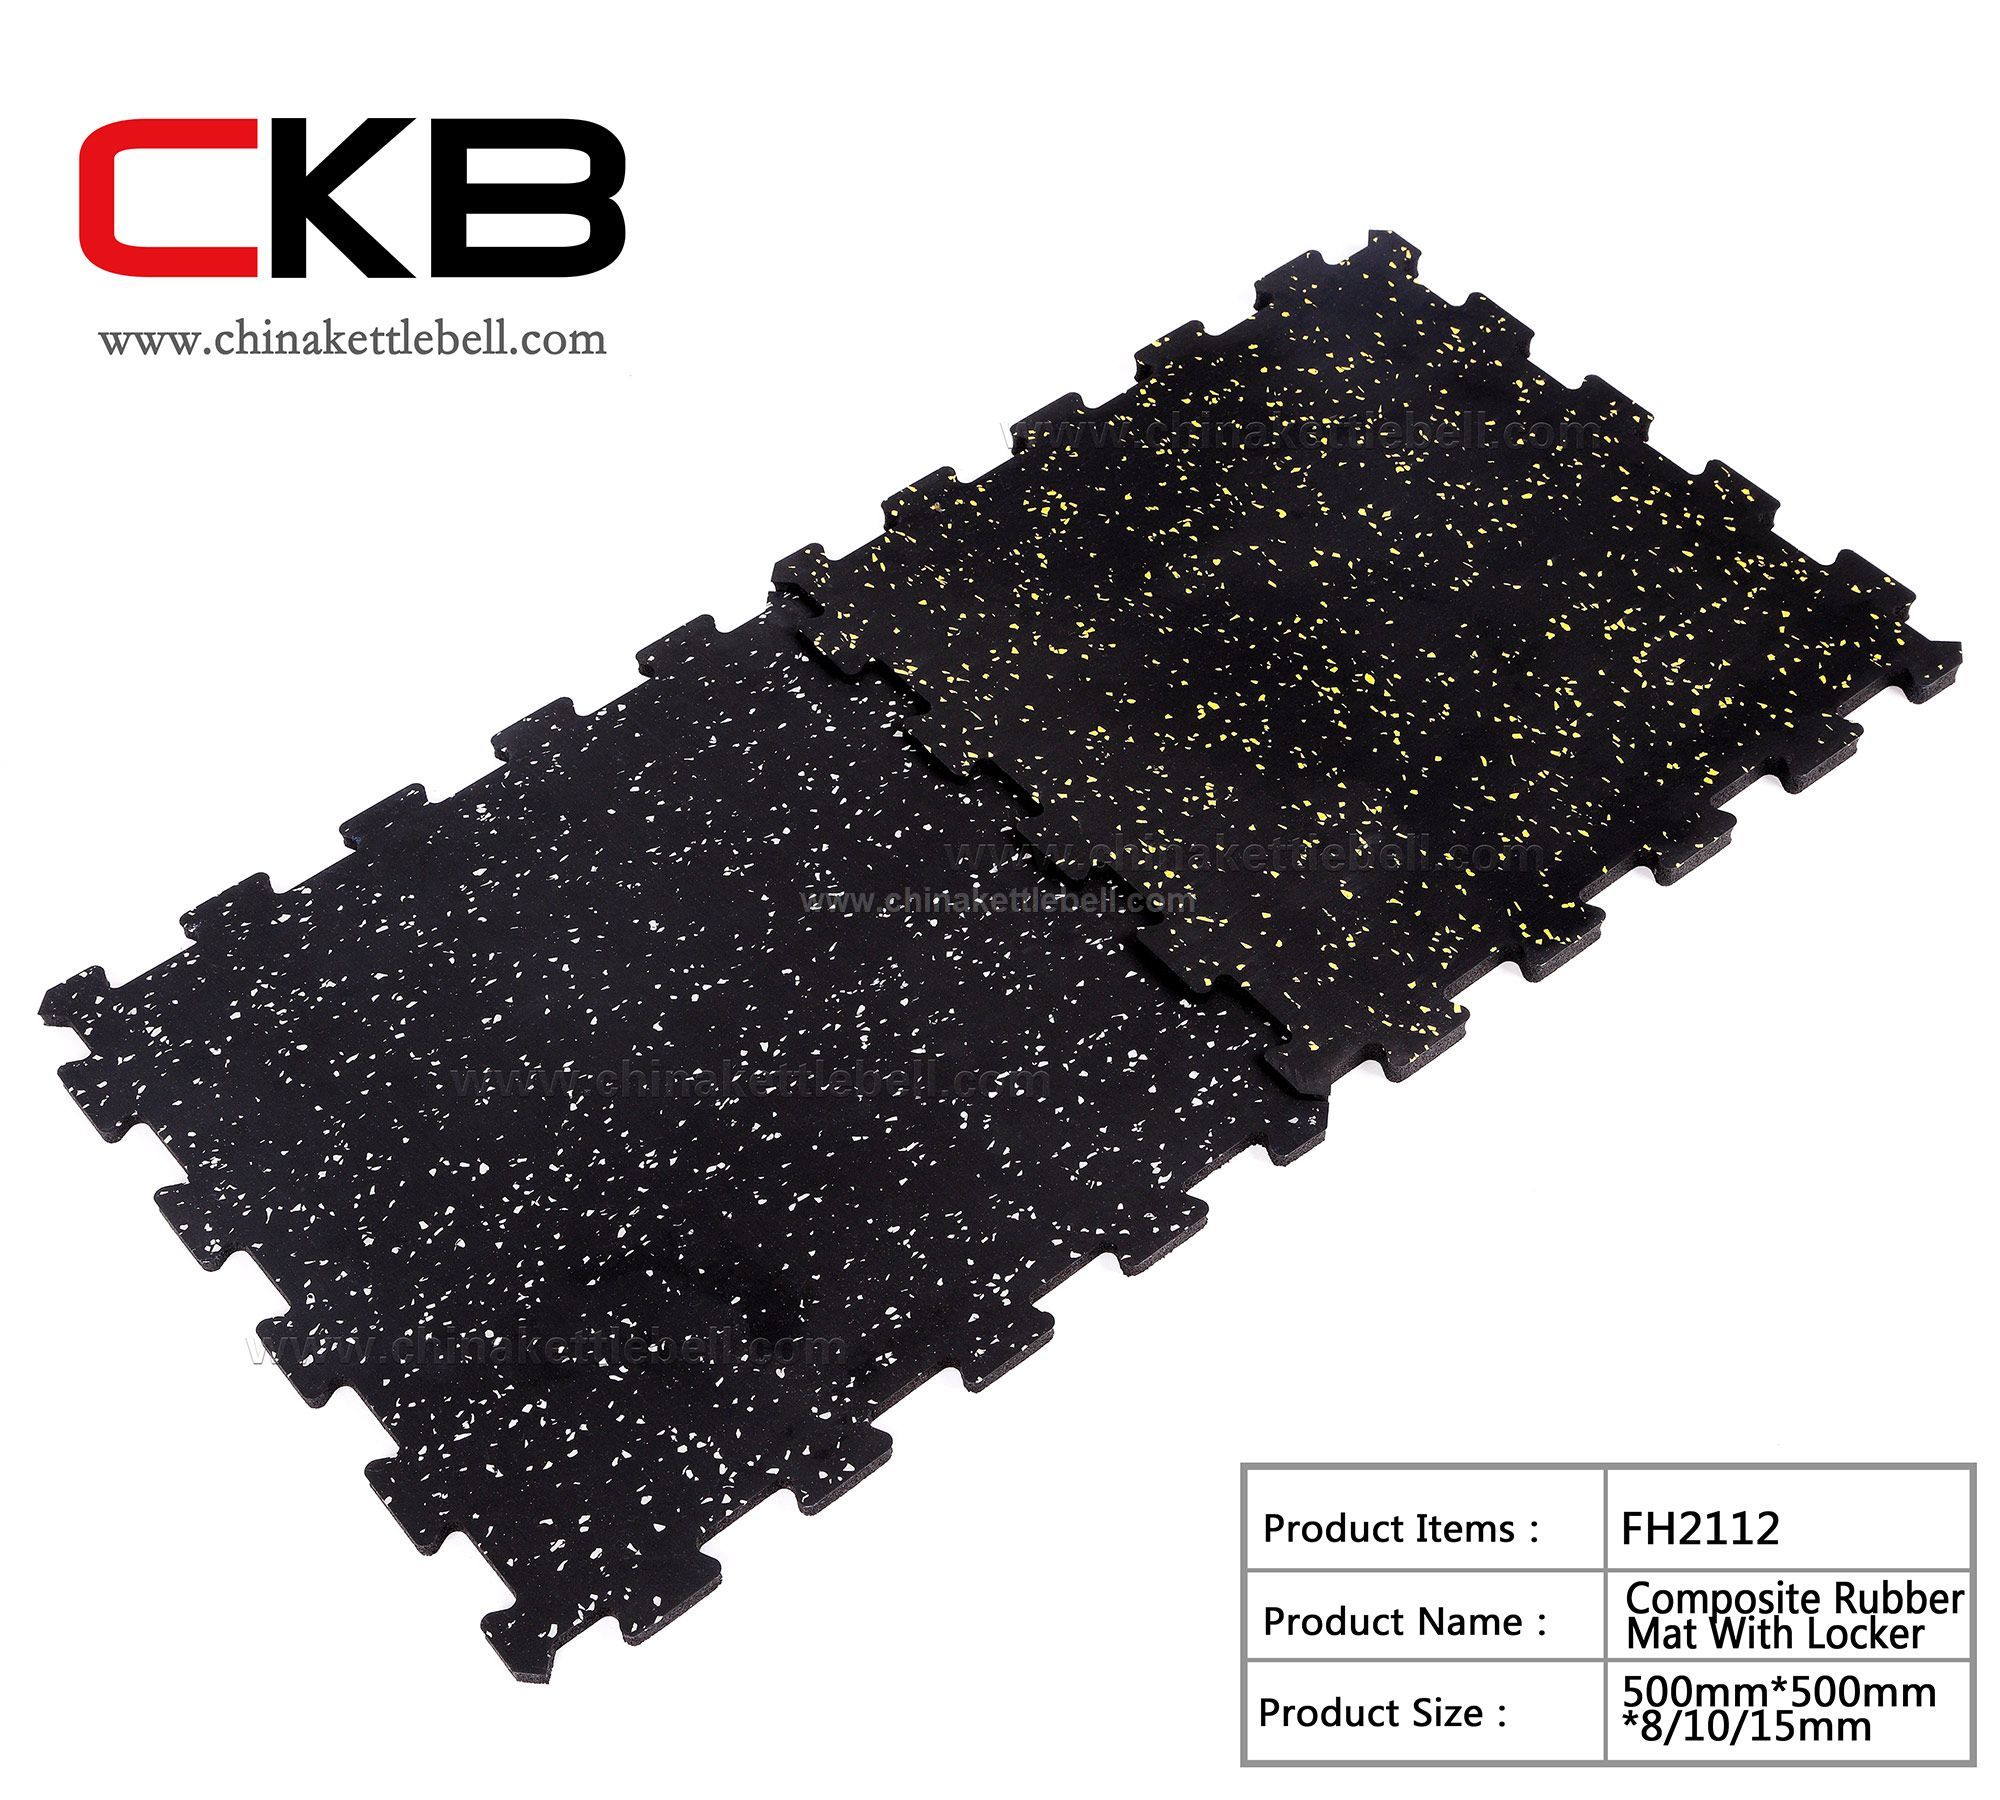 Composite Rubber Mat With Locker